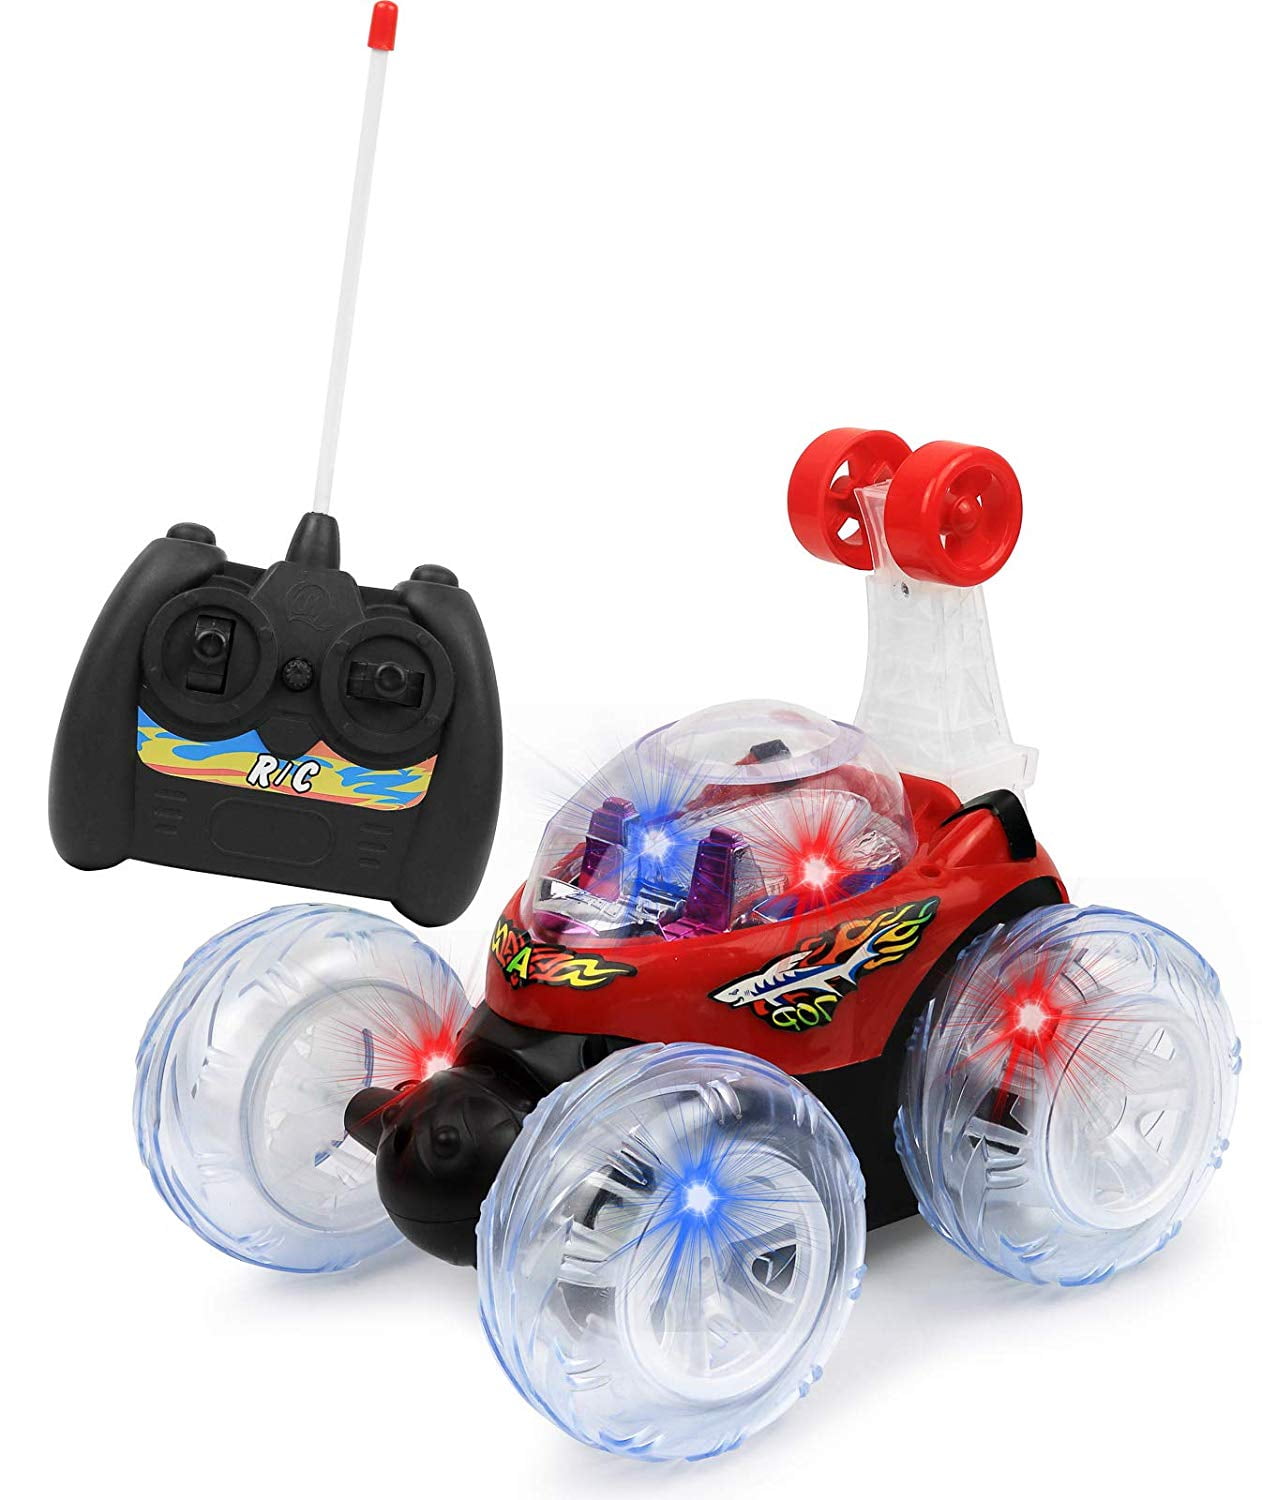 ！2020 Christmas ！Christmas Remote Control RC Bumper Cars Battle Cars Battery US 